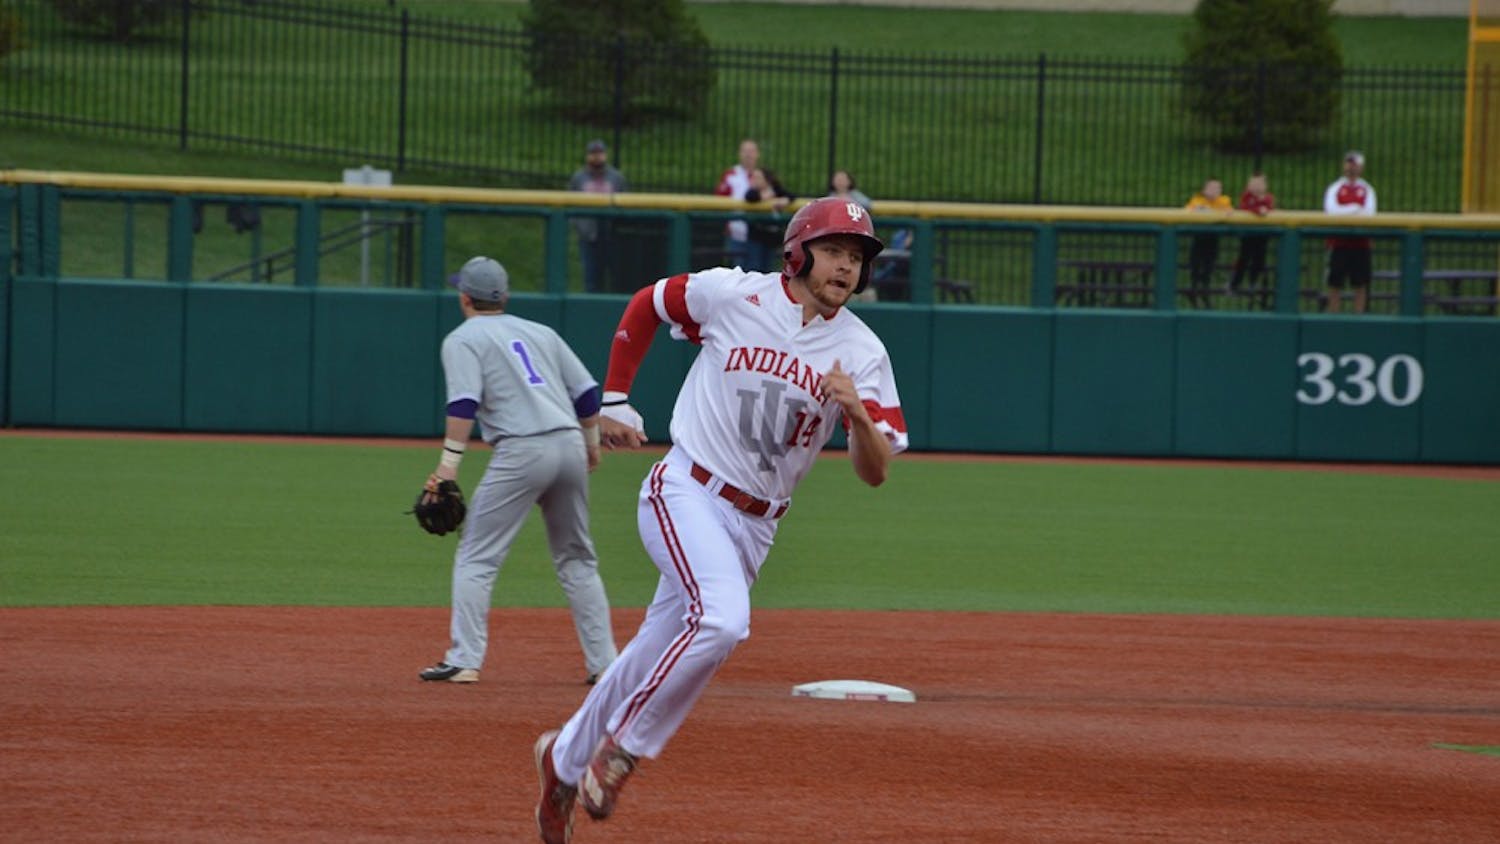 Sophomore infielder Matt Lloyd runs to third base after his teammate, Tony Butler, hit a grounder to left field. Butler brought in two runs and pushed the Hoosiers into the lead against the Evansville Aces.&nbsp;